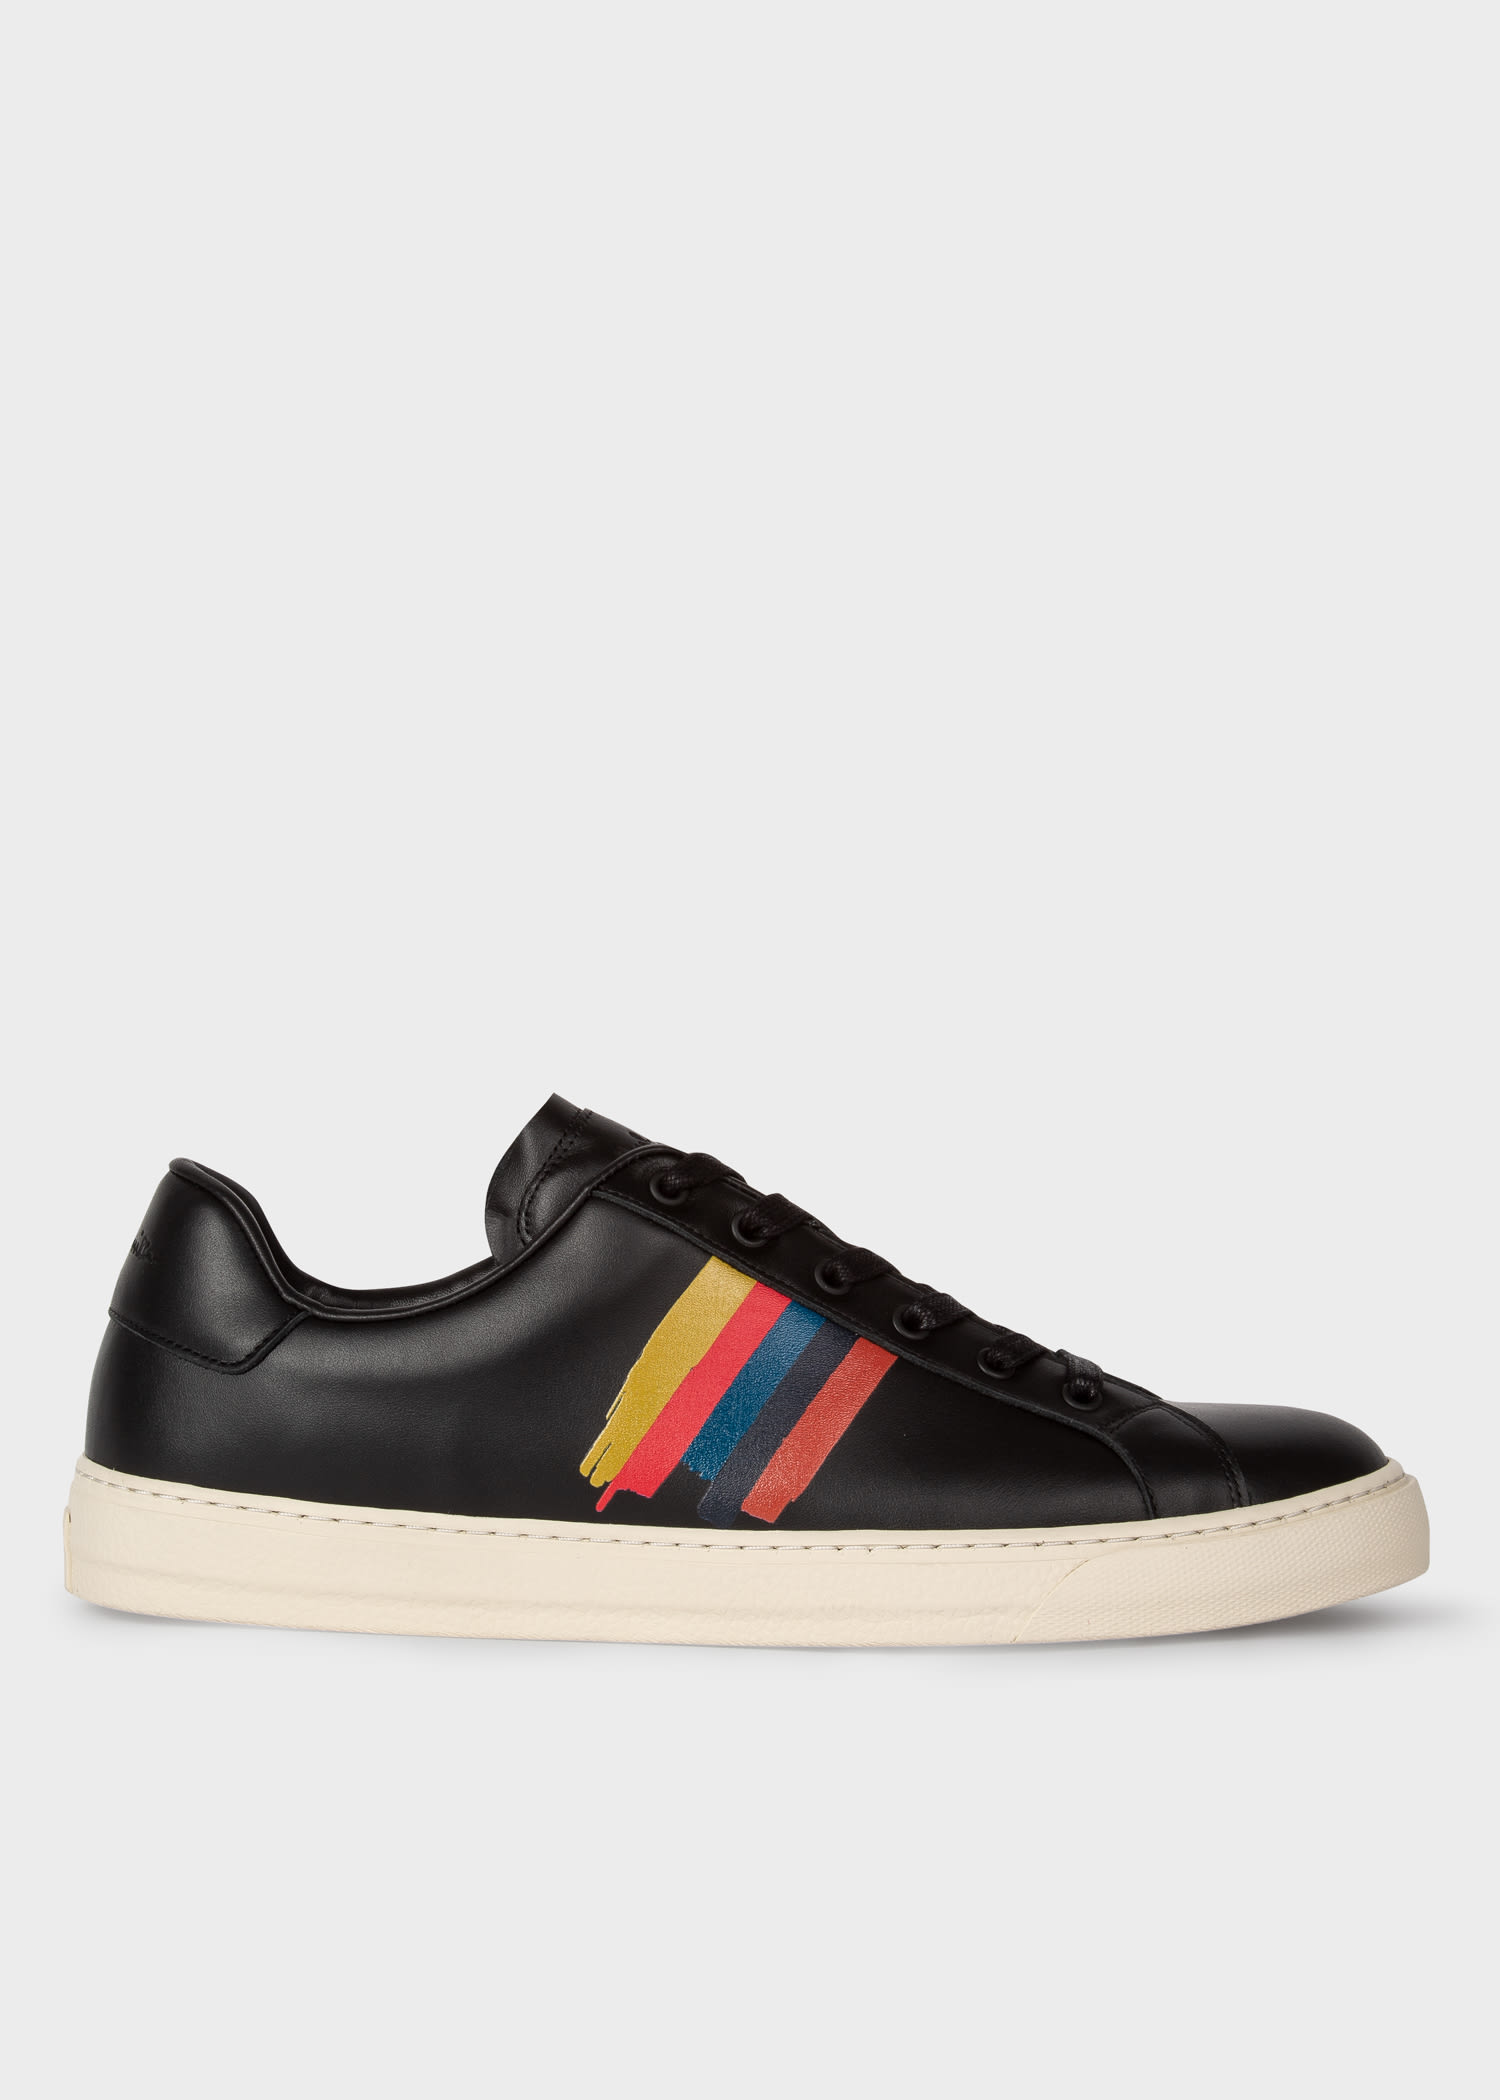 Men's Designer Shoes | Casual, Formal & Slip-On Shoes - Paul Smith